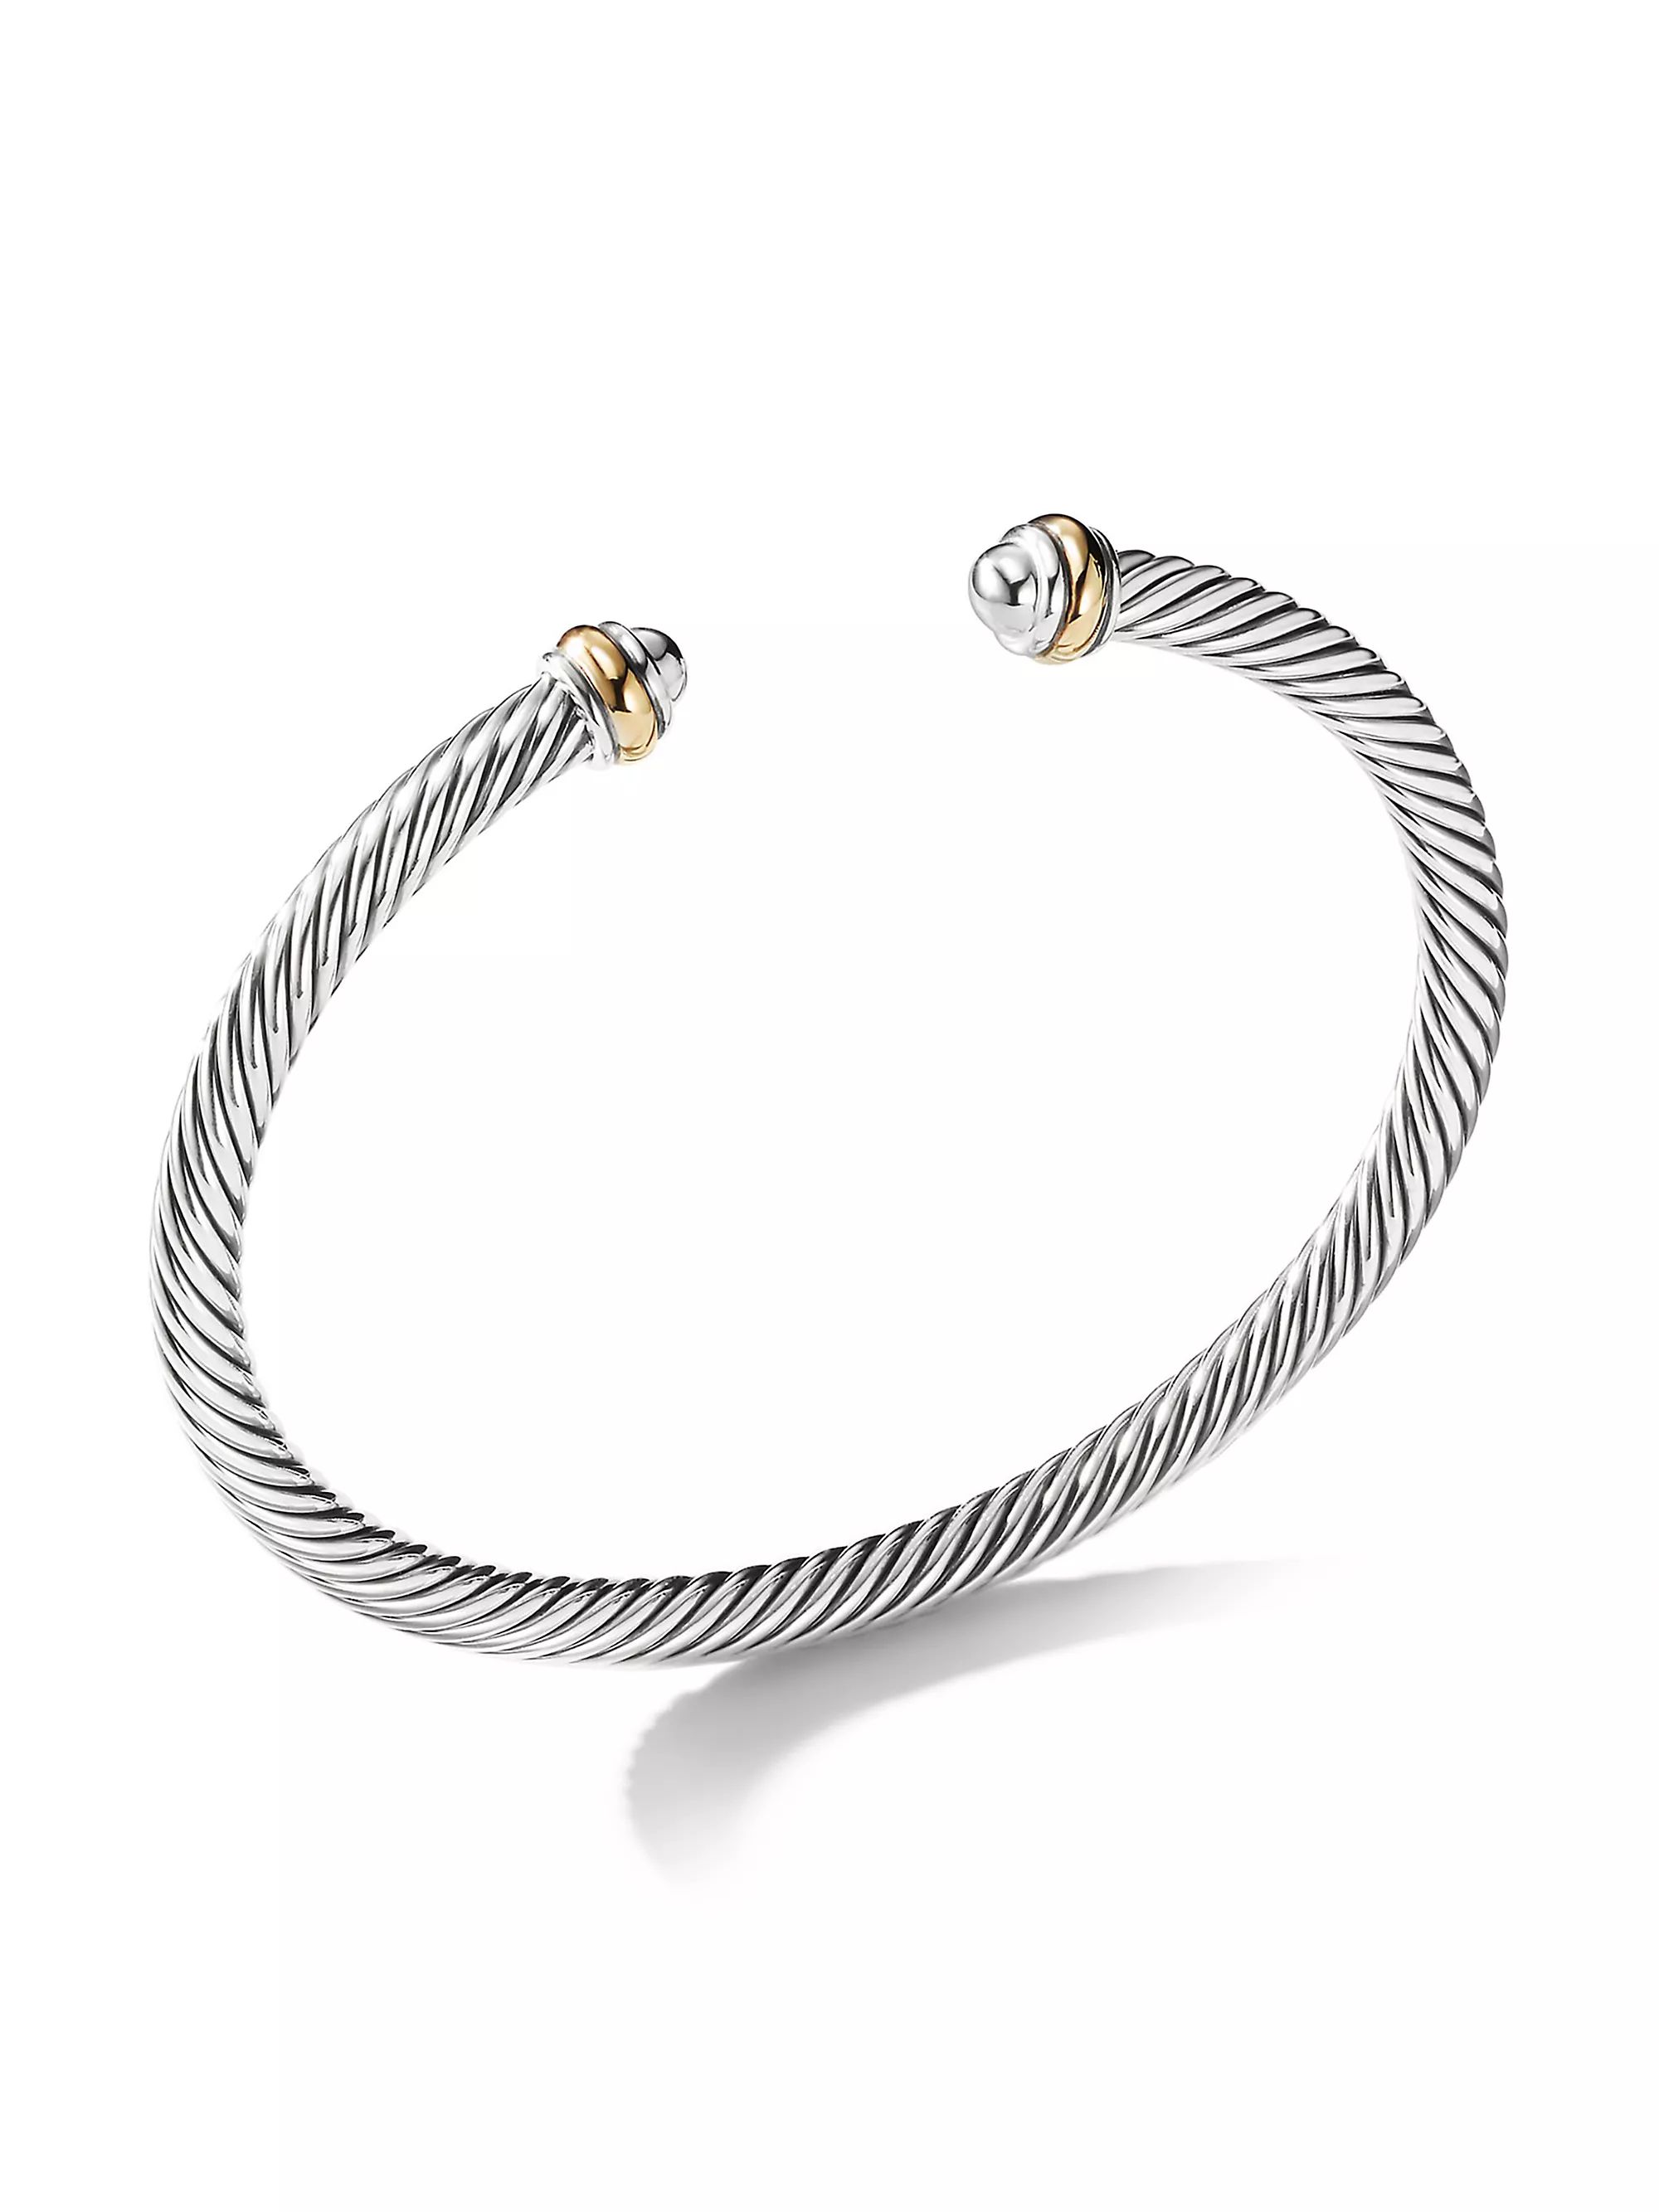 Cable Classics Bracelet in Sterling Silver | Saks Fifth Avenue